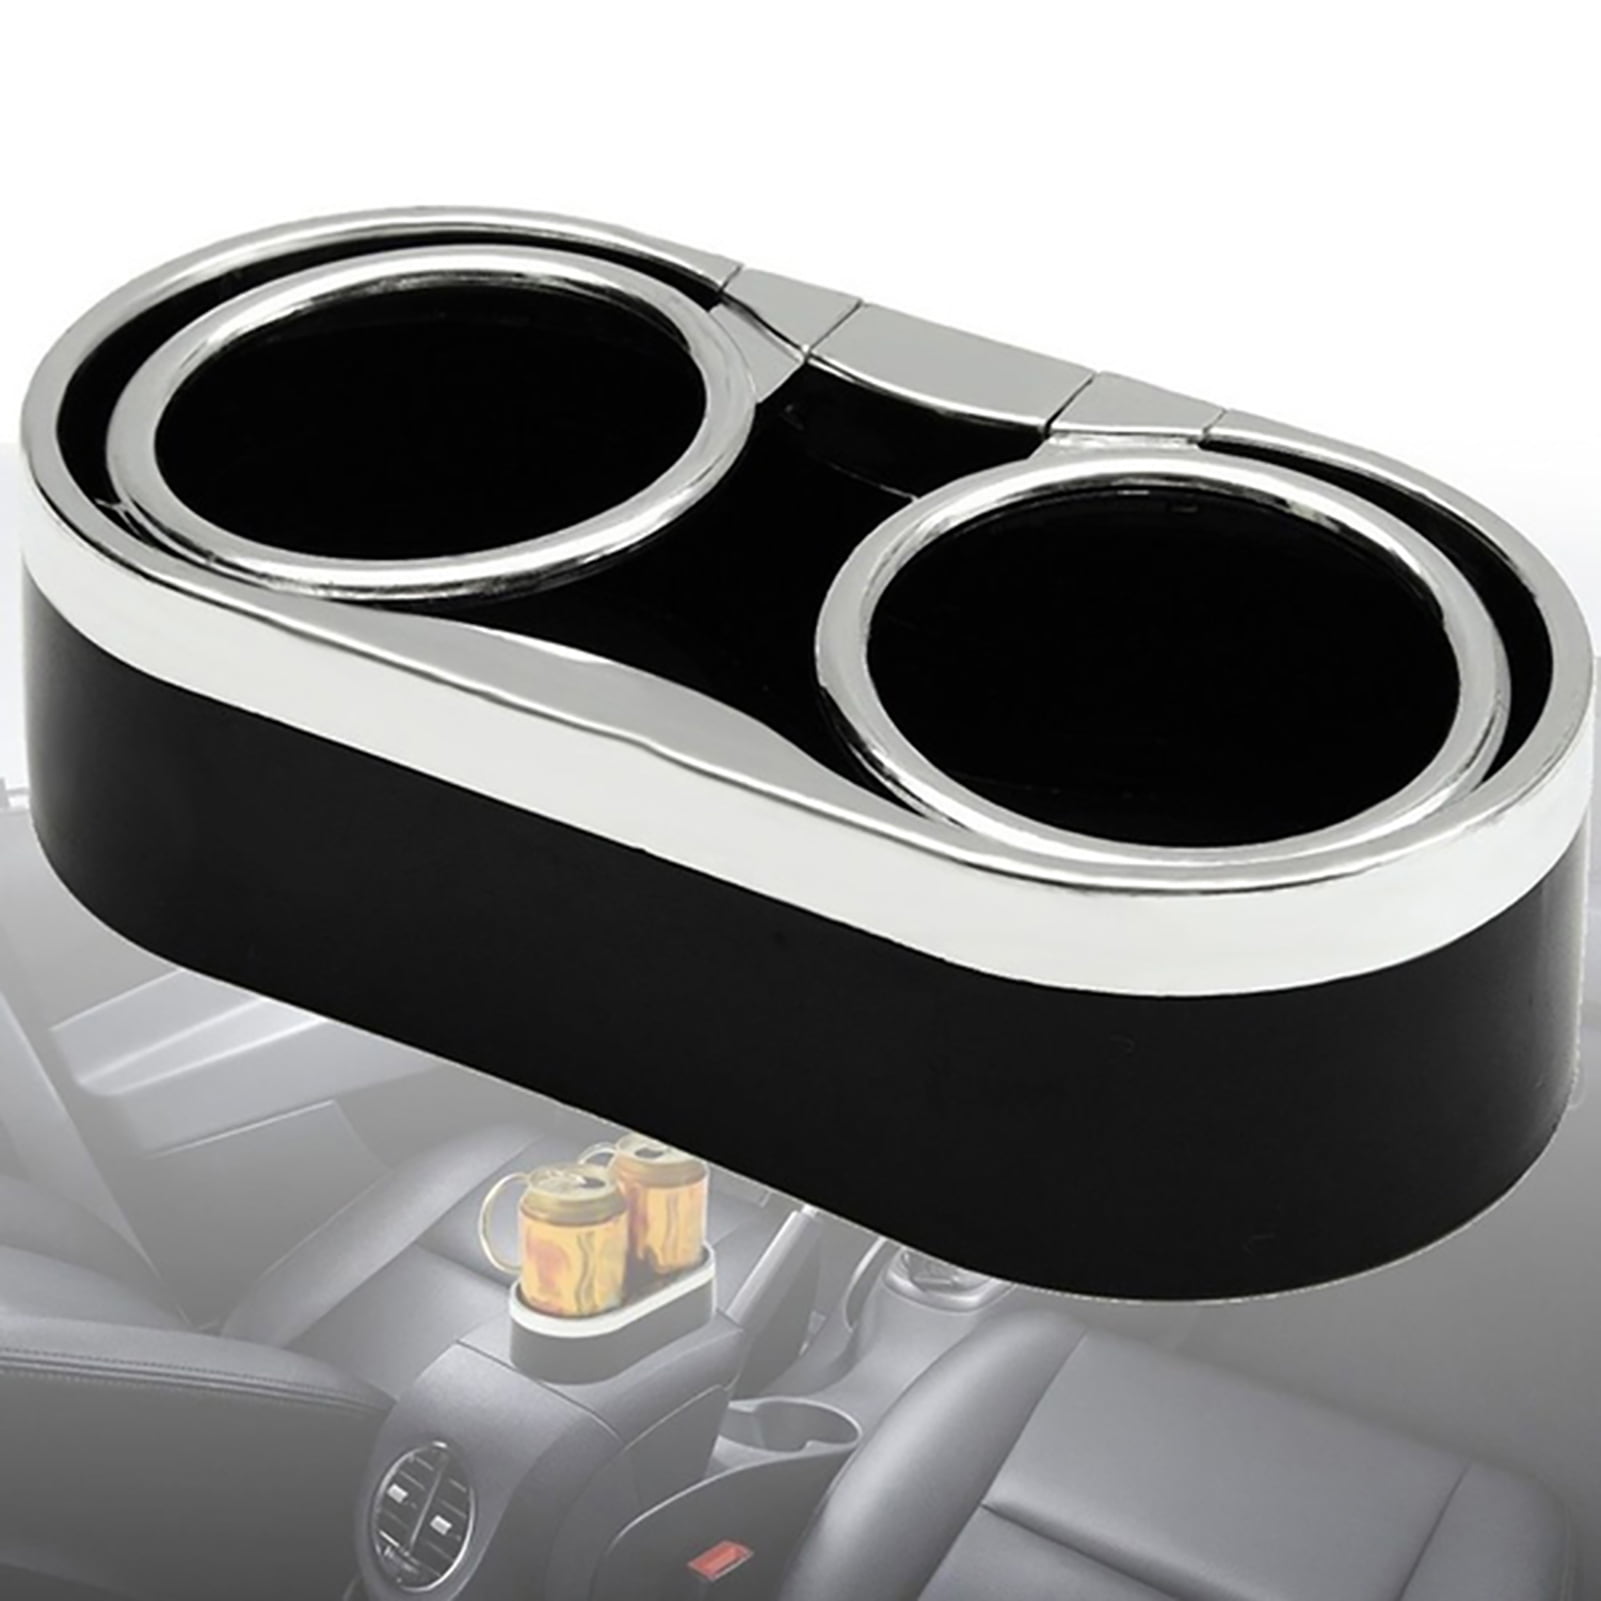 Vehicle-mounted Cup Holder with 3 Storage Cups Saving Car Space